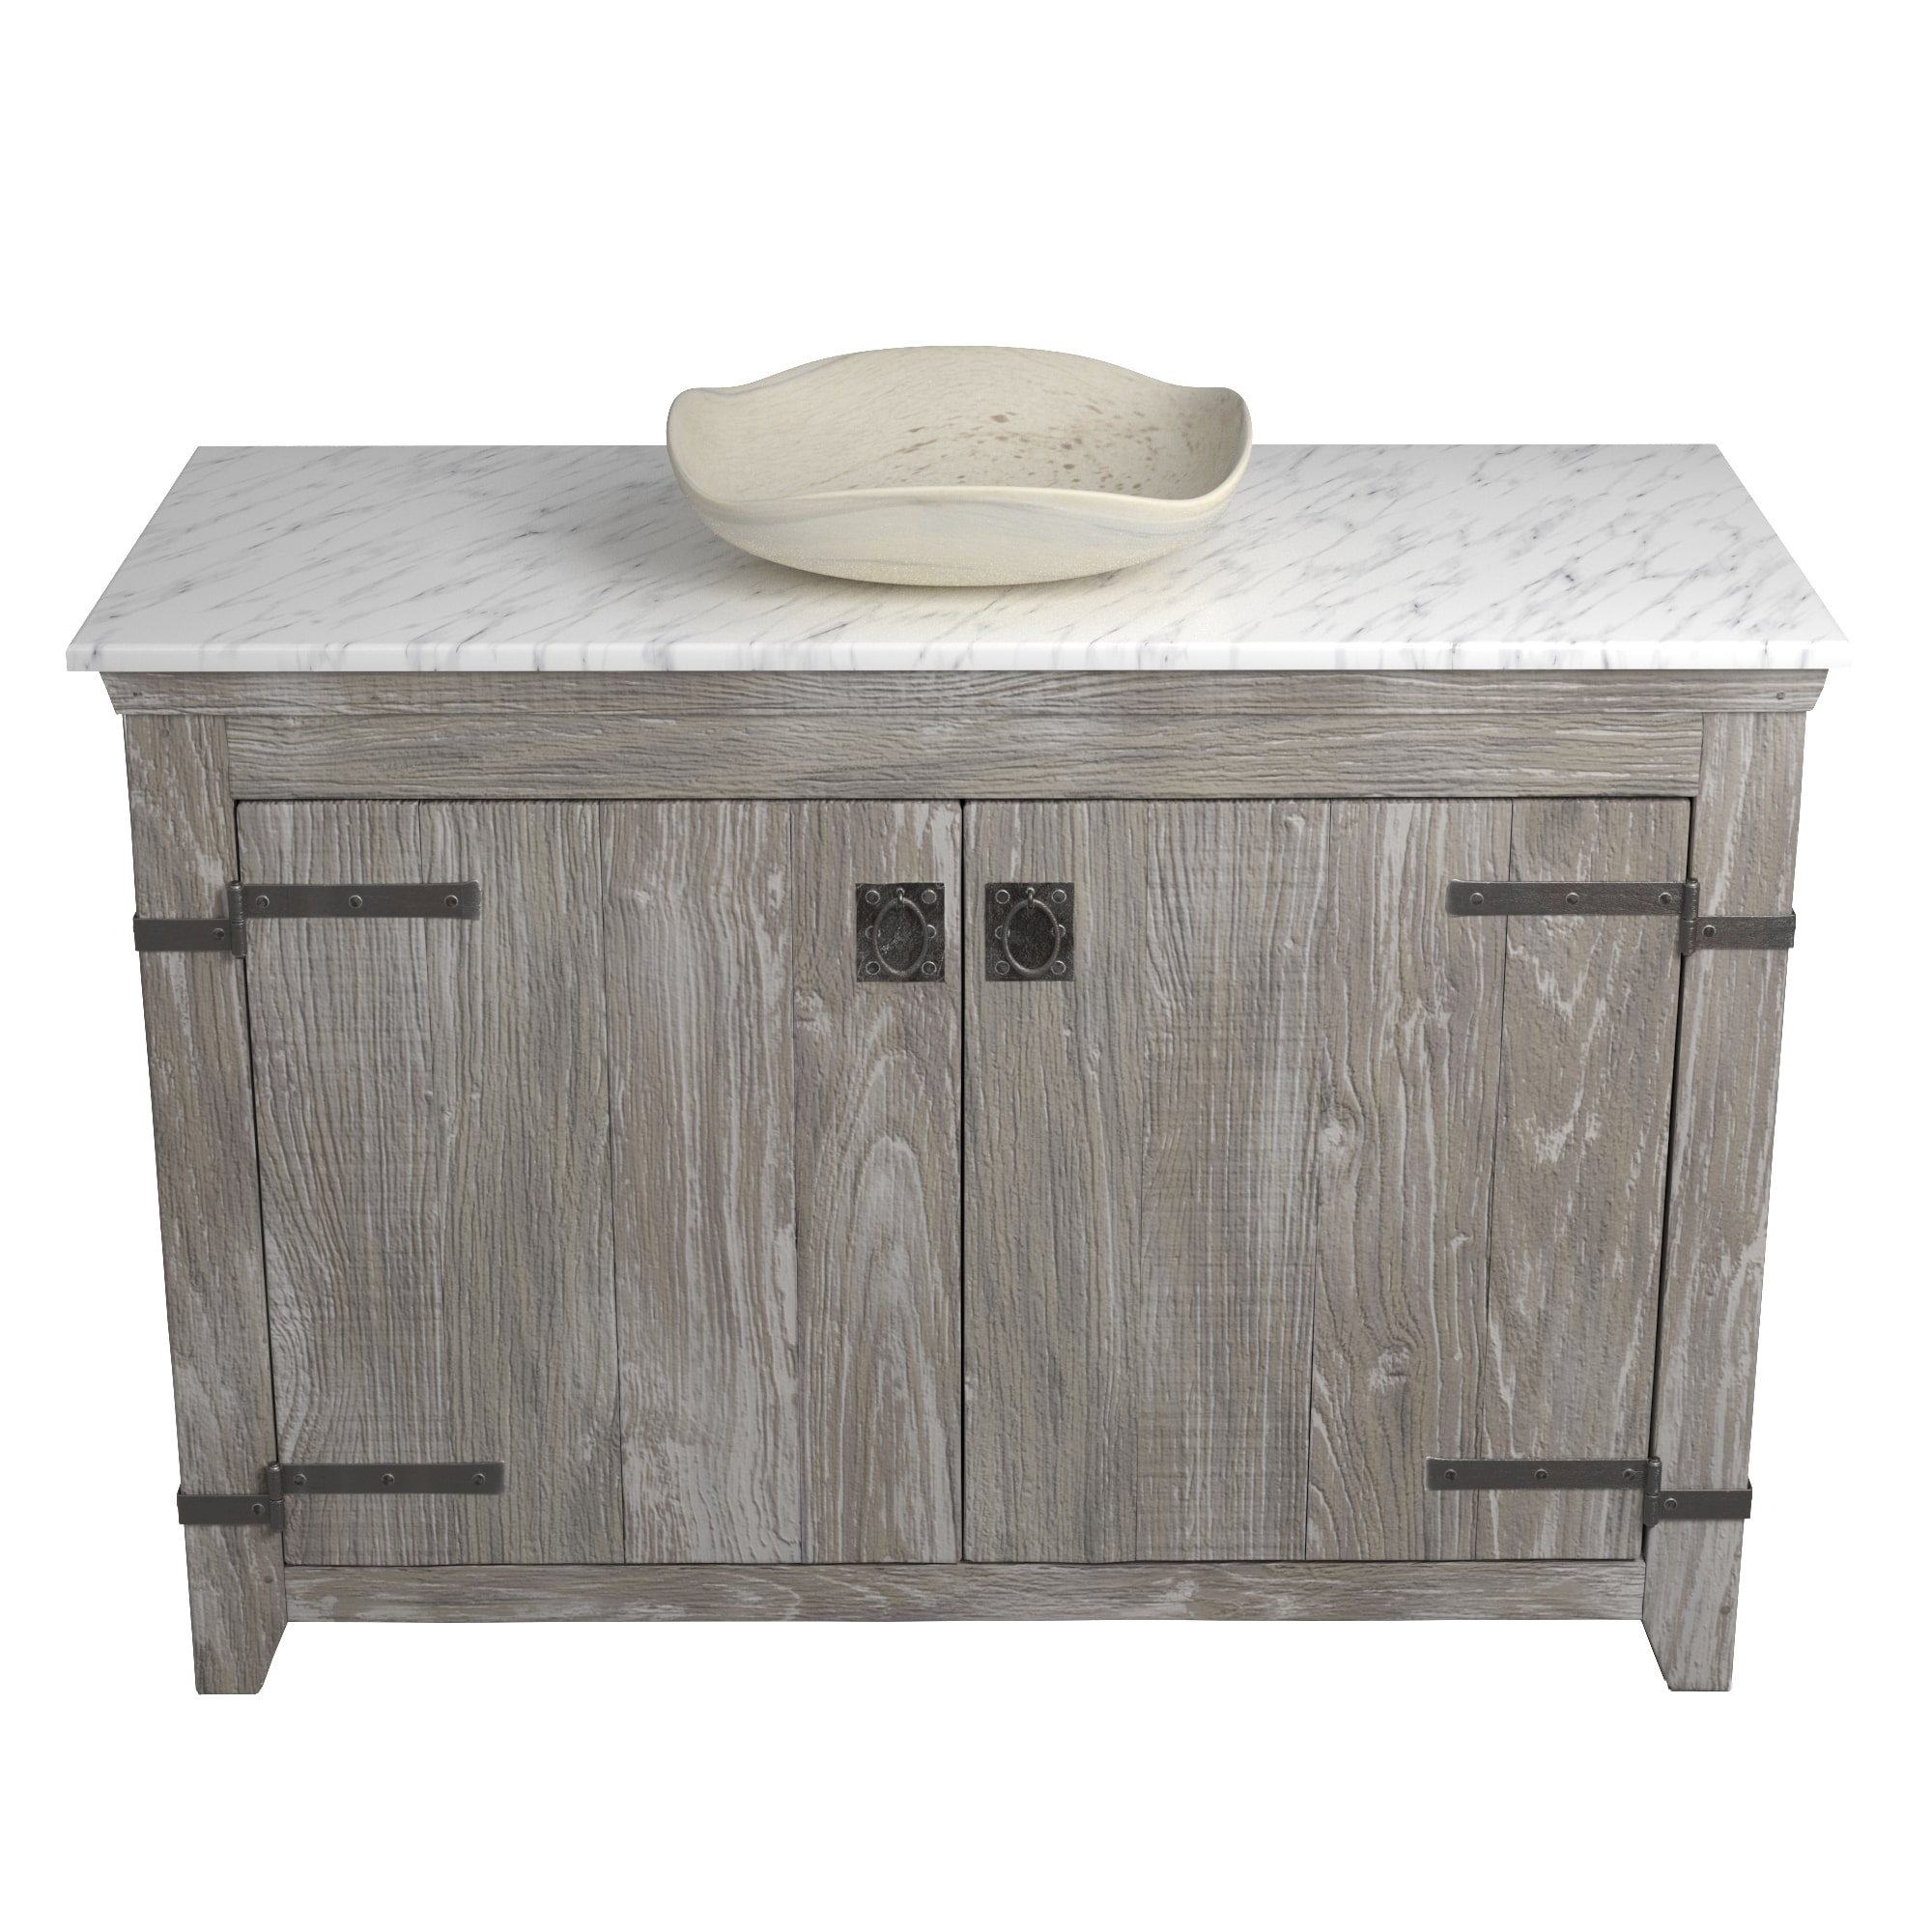 Native Trails 48" Americana Vanity in Driftwood with Carrara Marble Top and Lido in Beachcomber, No Faucet Hole, BND48-VB-CT-MG-024